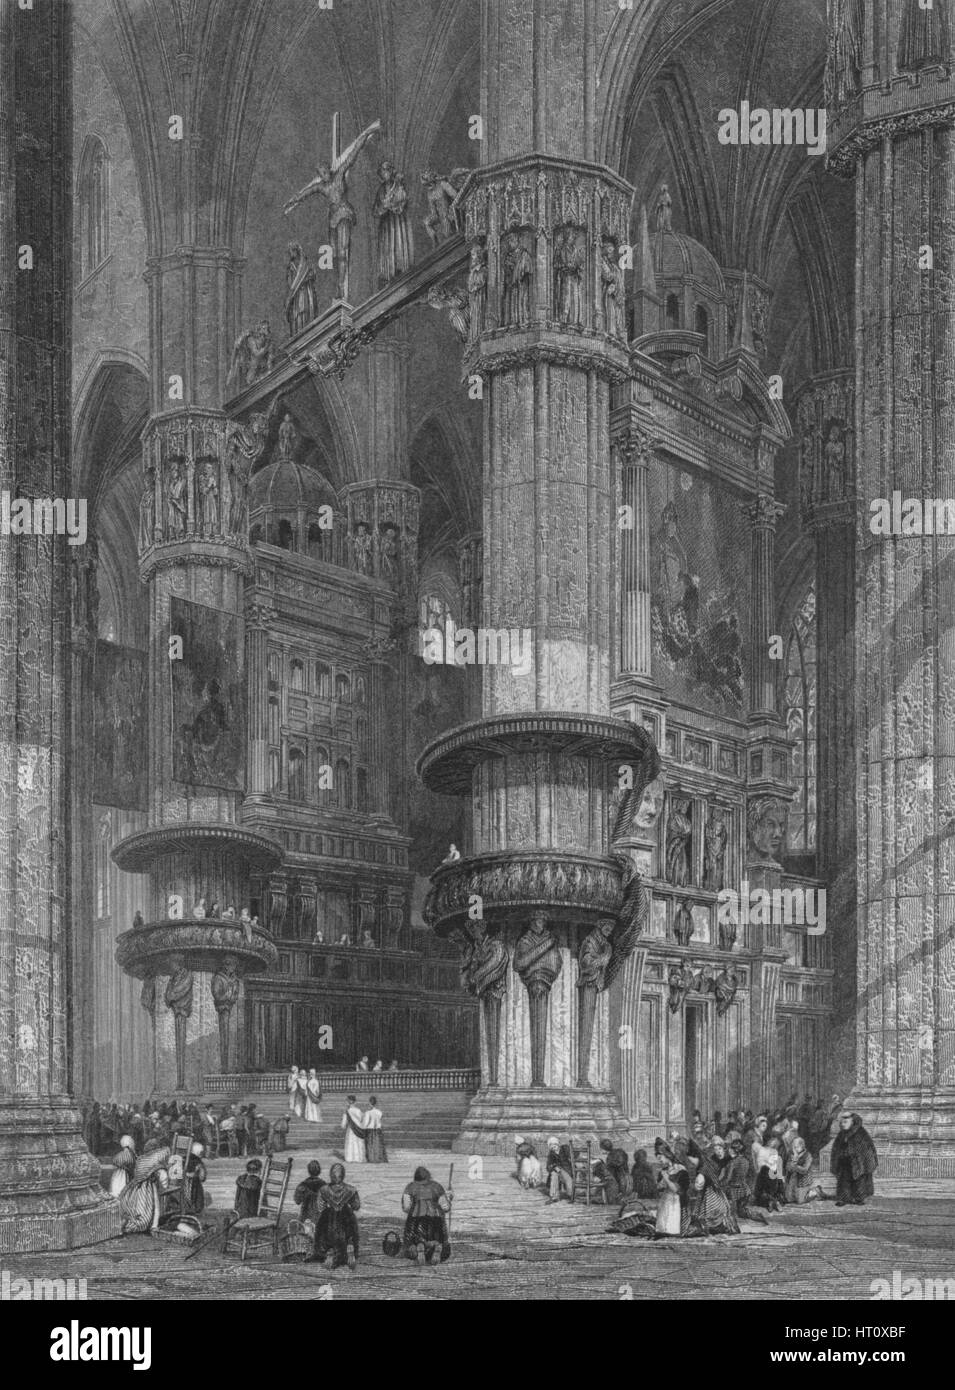 'The Interior of Milan Cathedral, Looking Towards The High Altar', 1844.  Artist: Thomas Higham. Stock Photo